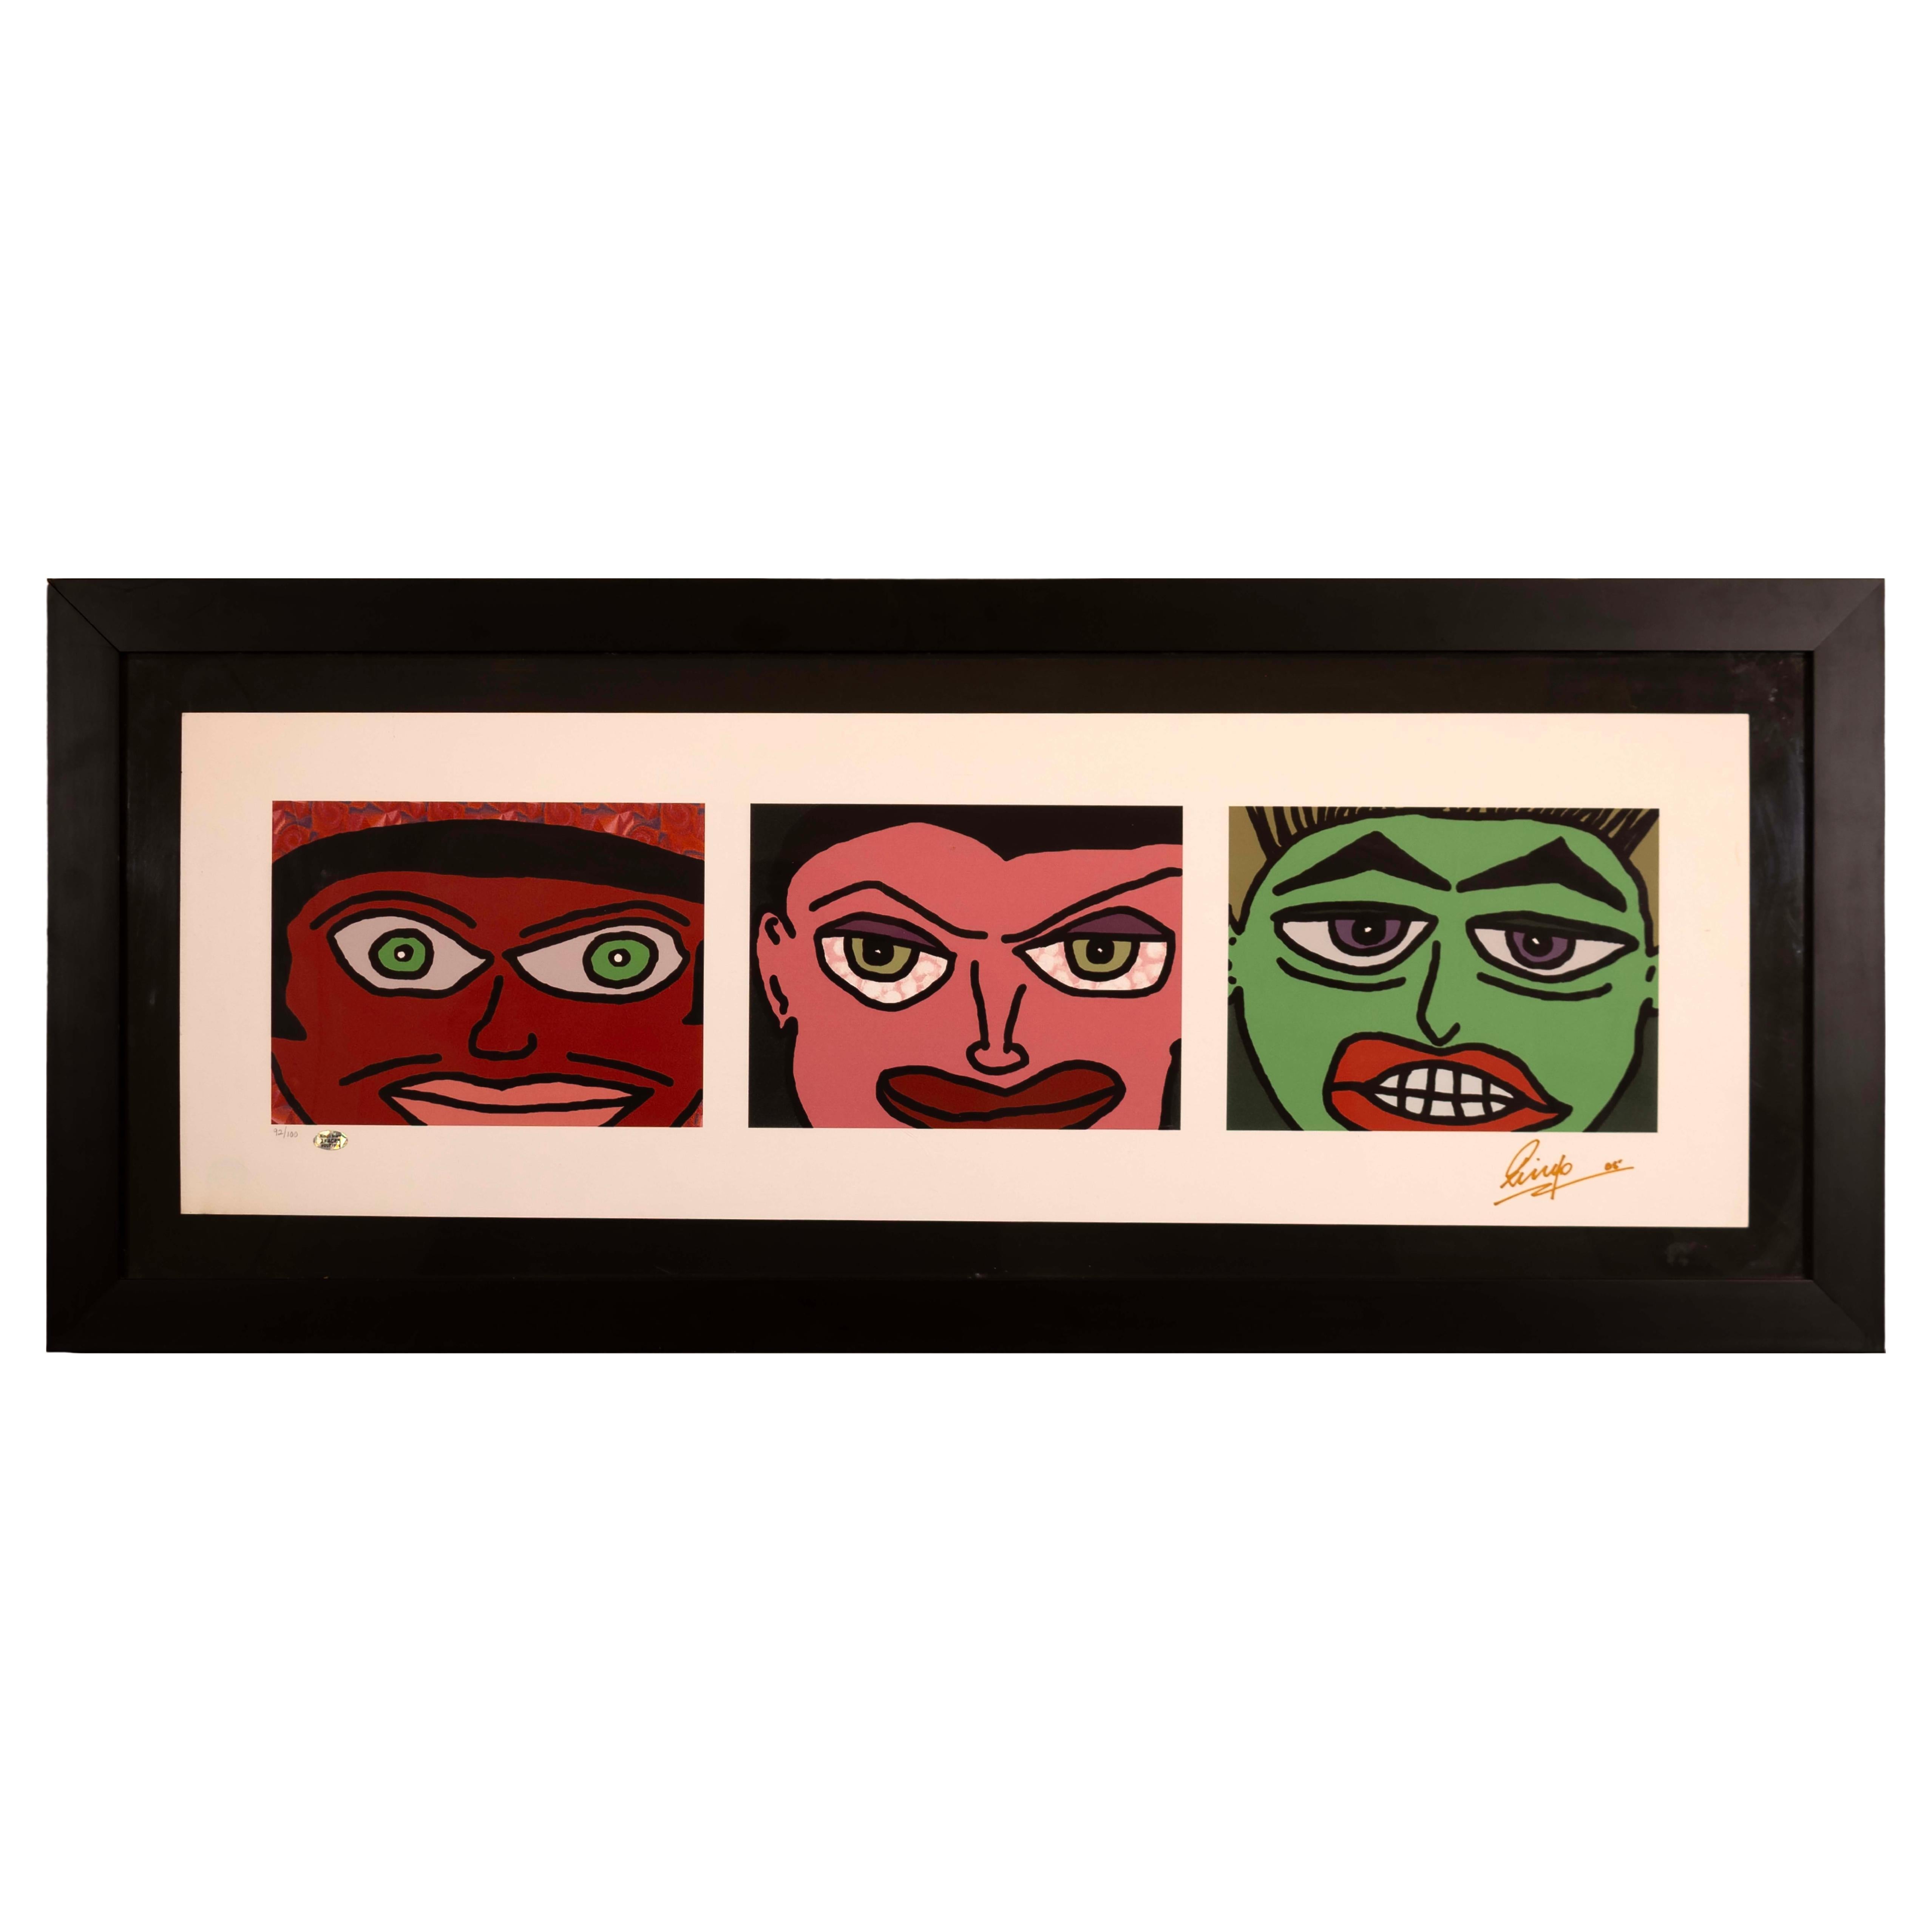 Ringo Starr 3 Faces Signed Contemporary Pop Art Serigraph on Paper 92/100 Framed For Sale